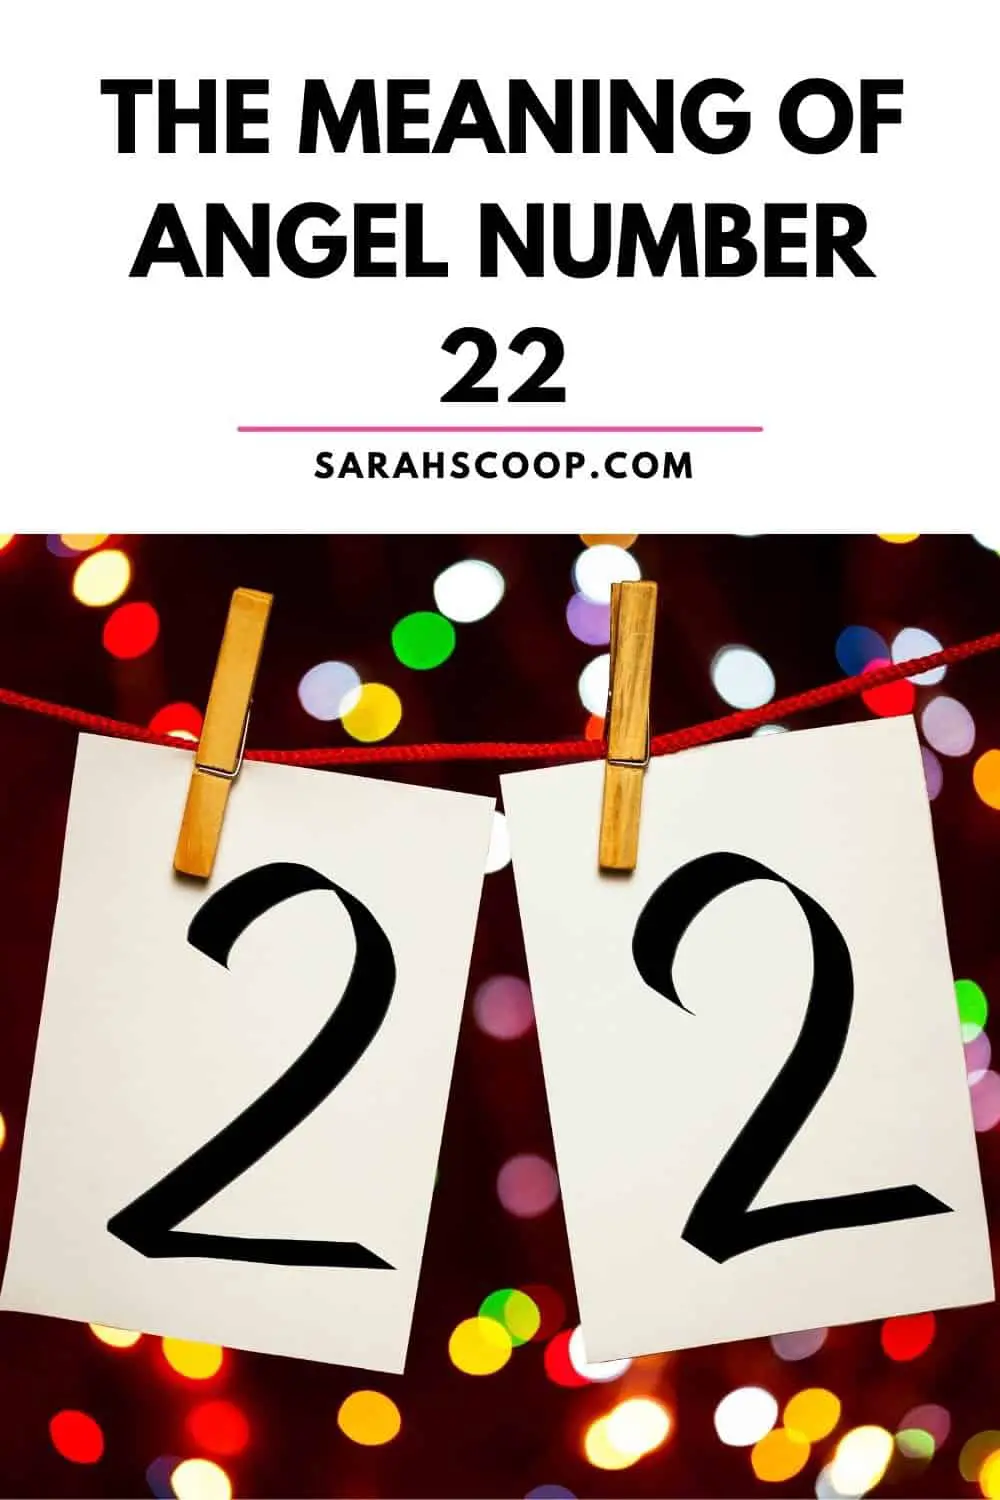 How To Use The 22 Angel Number